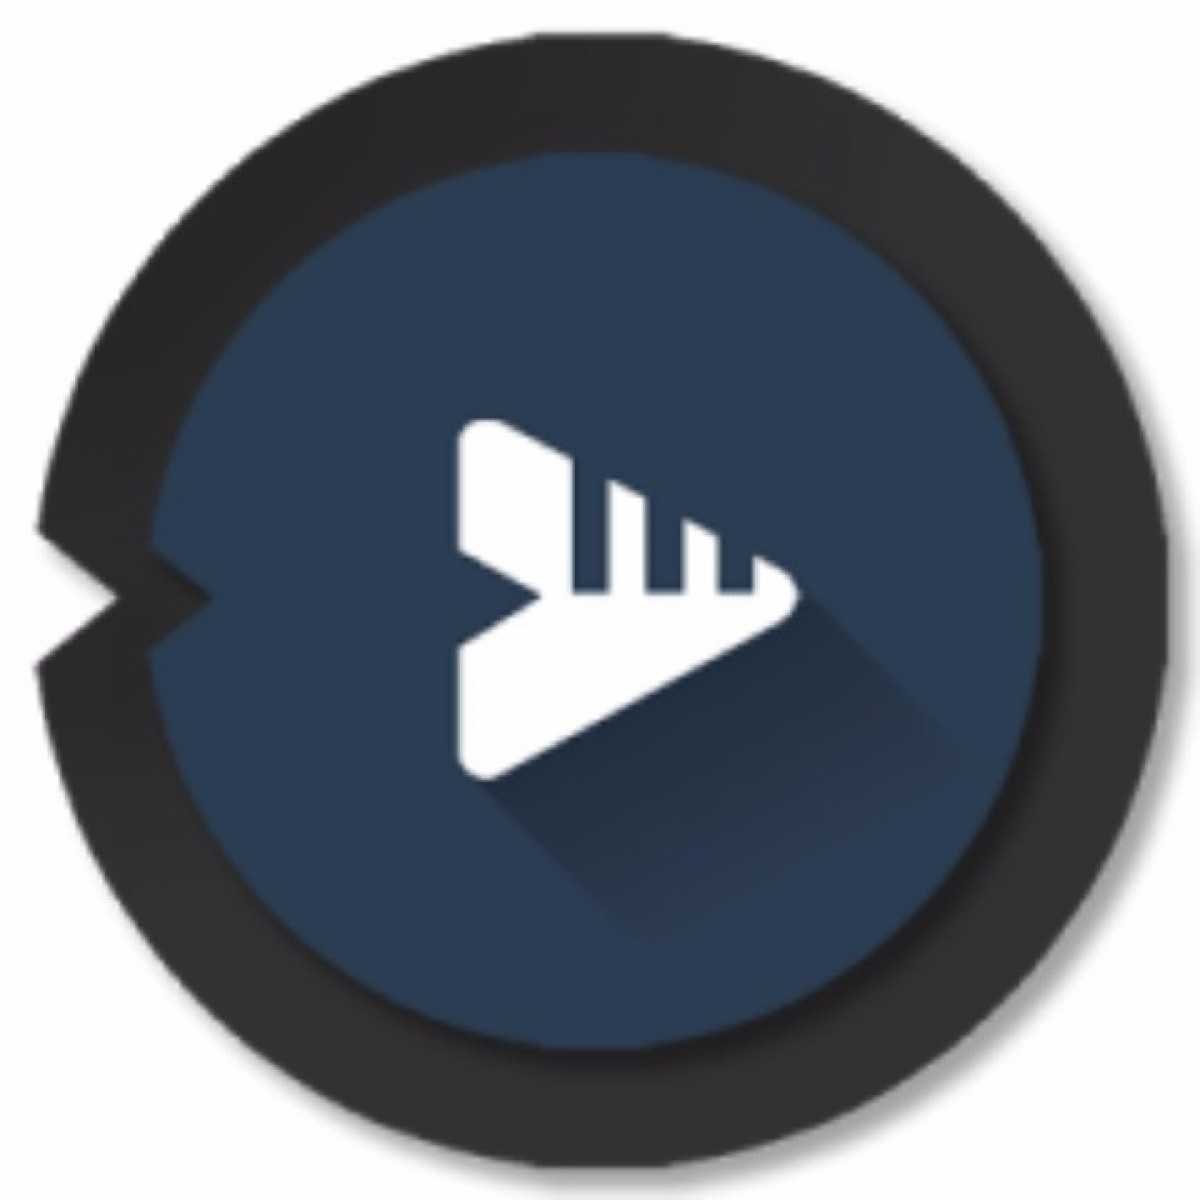 BlackPlayer EX Music Player v20.59 build 386 (Patched) Apk